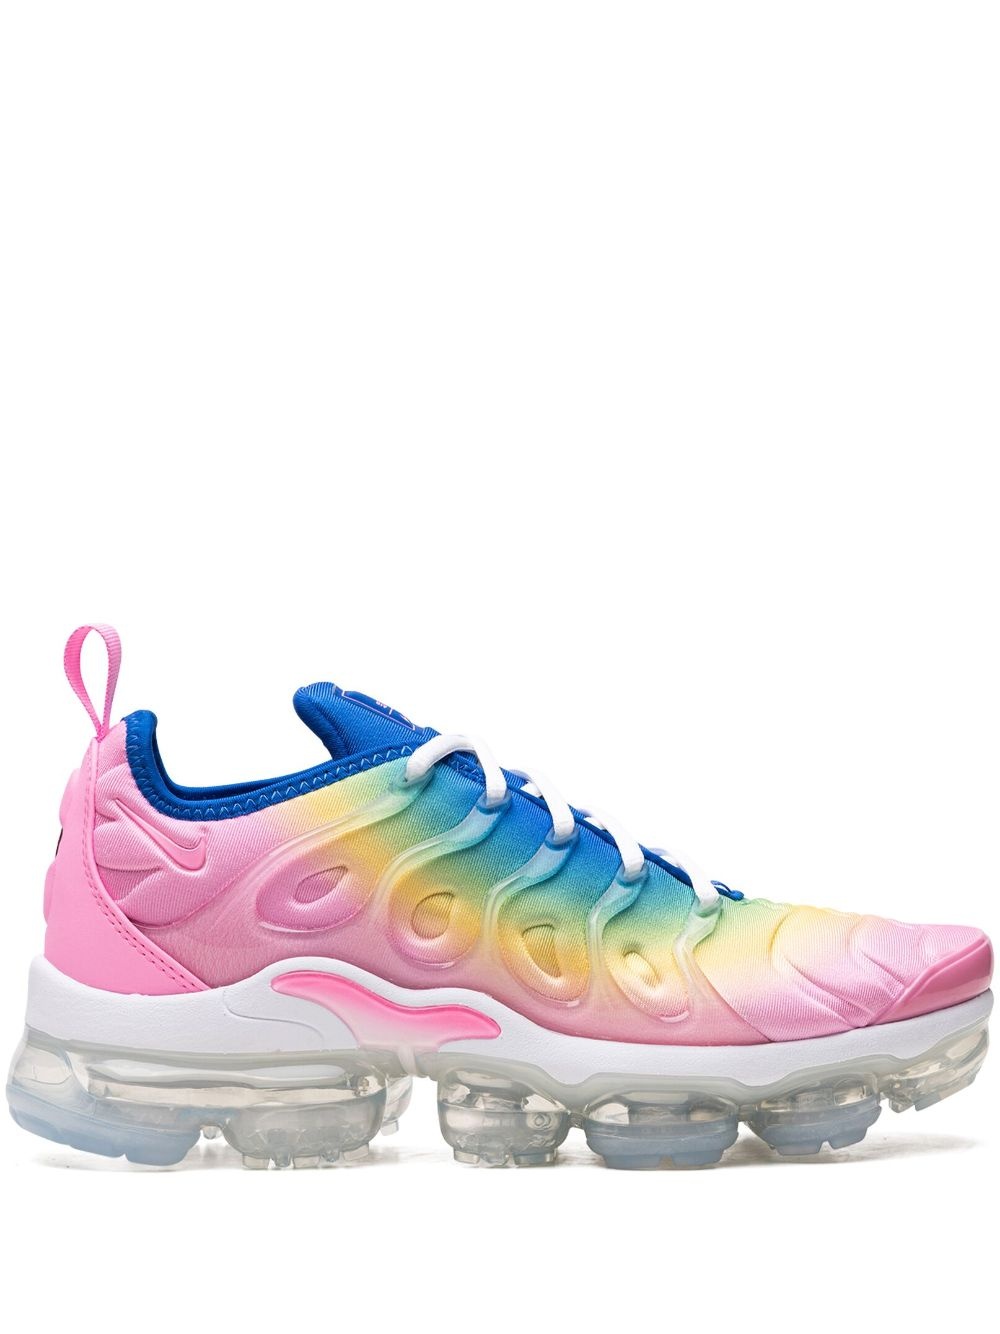 Air VaporMax Plus "Cotton Candy Rainbow" sneakers - 1